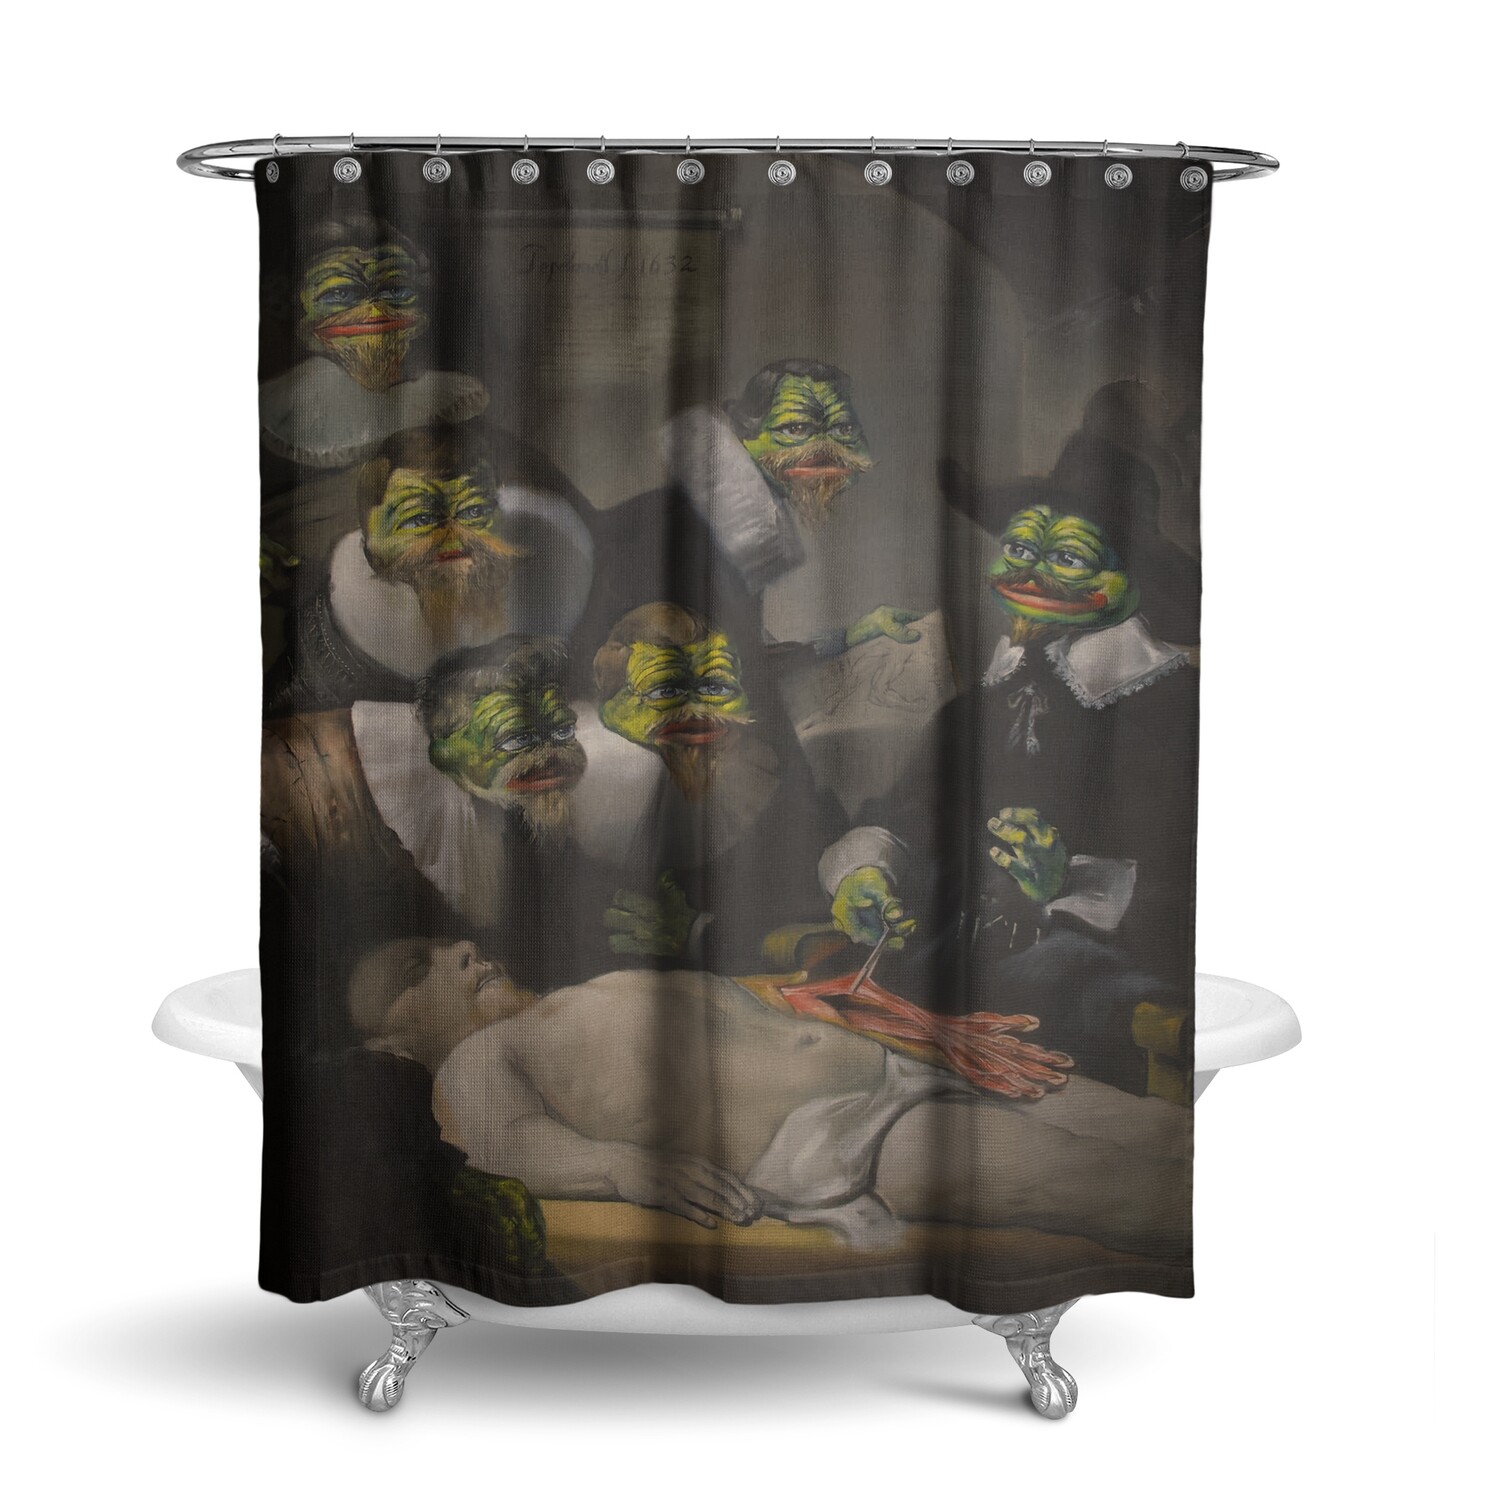 Autopsy of Pepe (shower curtain)